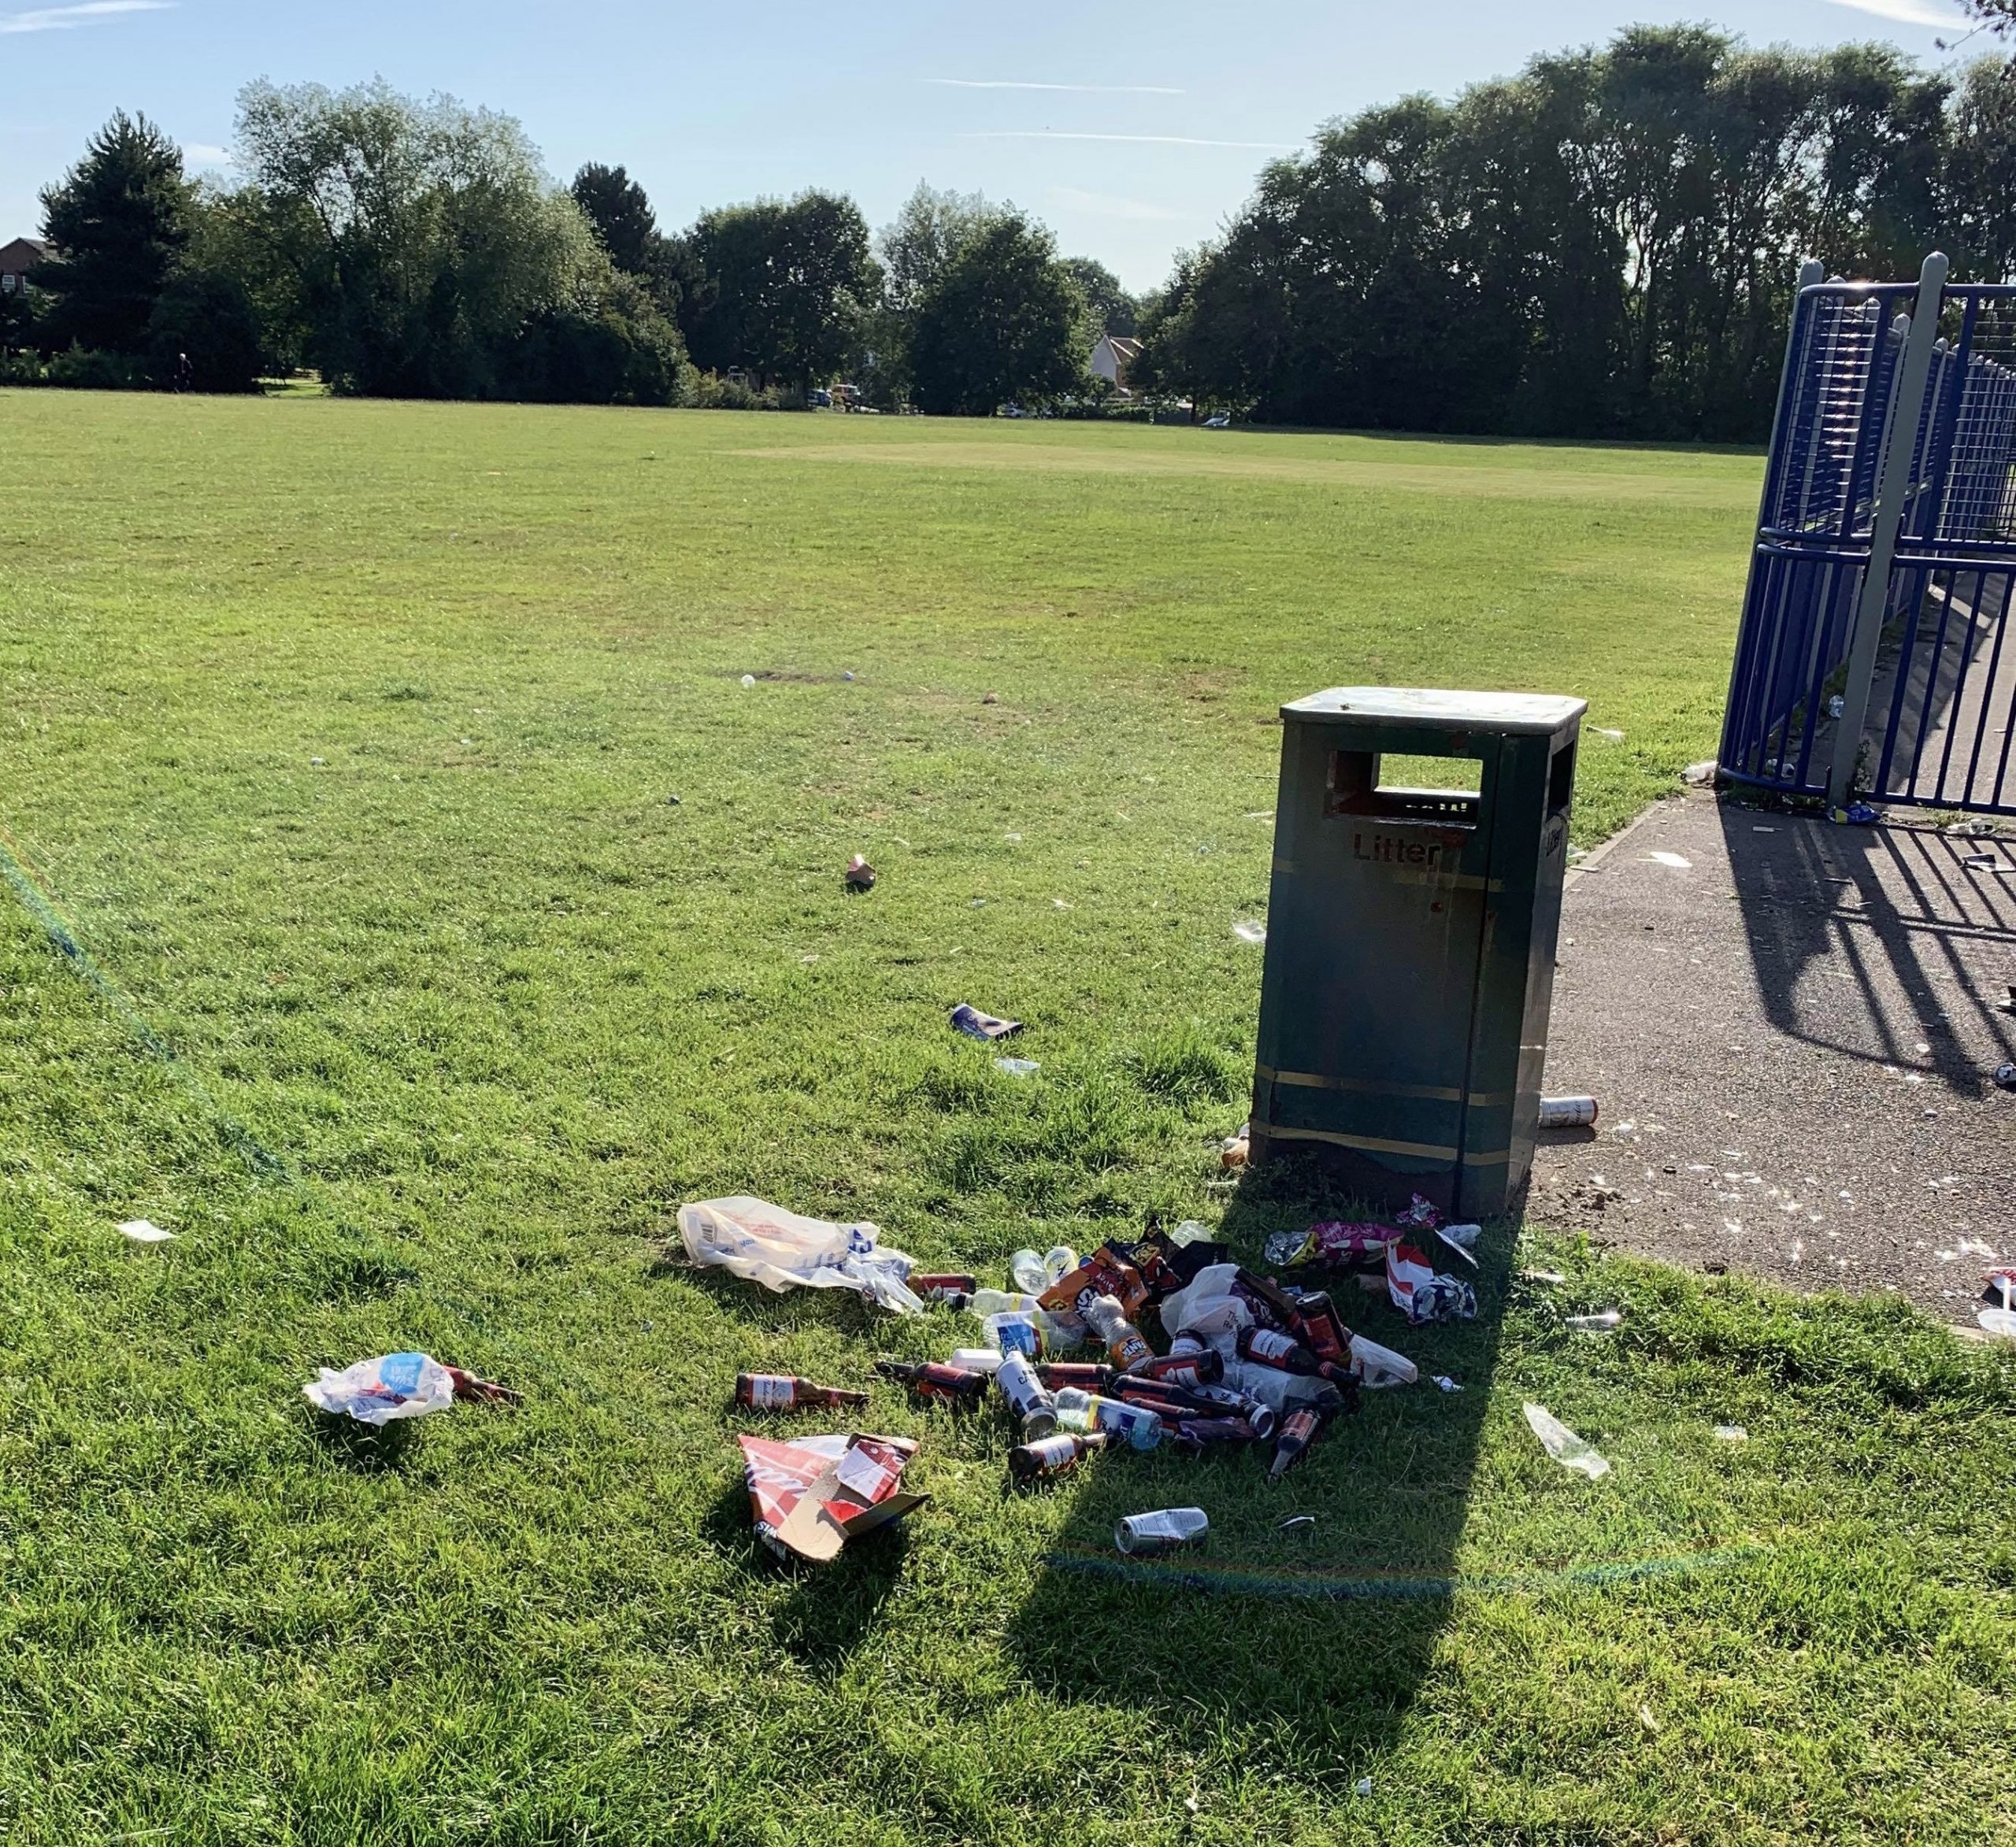 NEWS | Residents frustrated by litter dumped in park